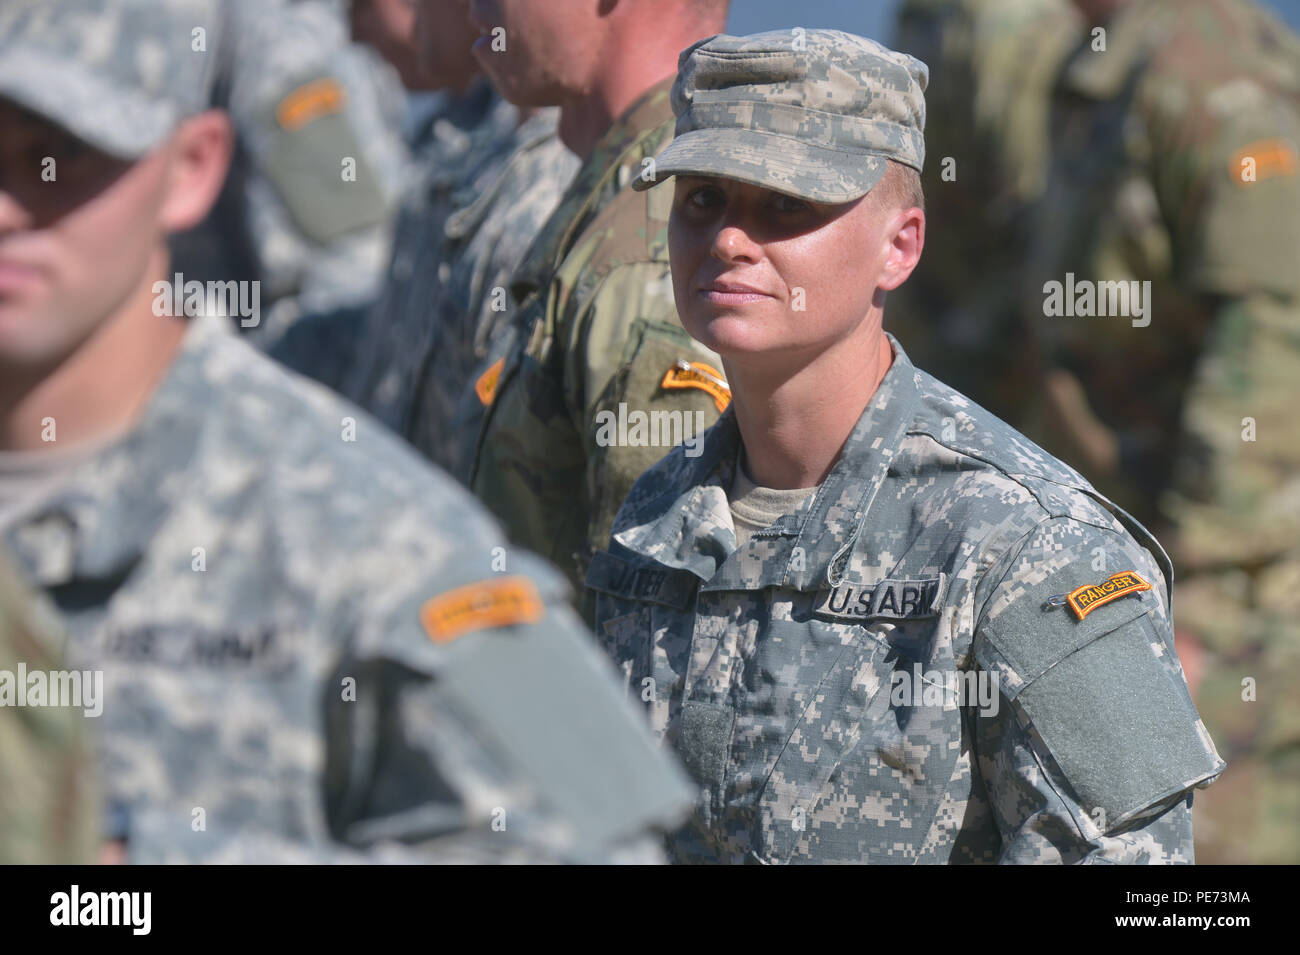 U.S. Army Maj. Lisa Jaster stands in formation during the Ranger School graduation on Fort Benning, Ga., Oct. 16, 2015. Jaster is the third female Ranger School graduate. (U.S. Army photo by Staff Sgt. Alex Manne/ Released) Stock Photo